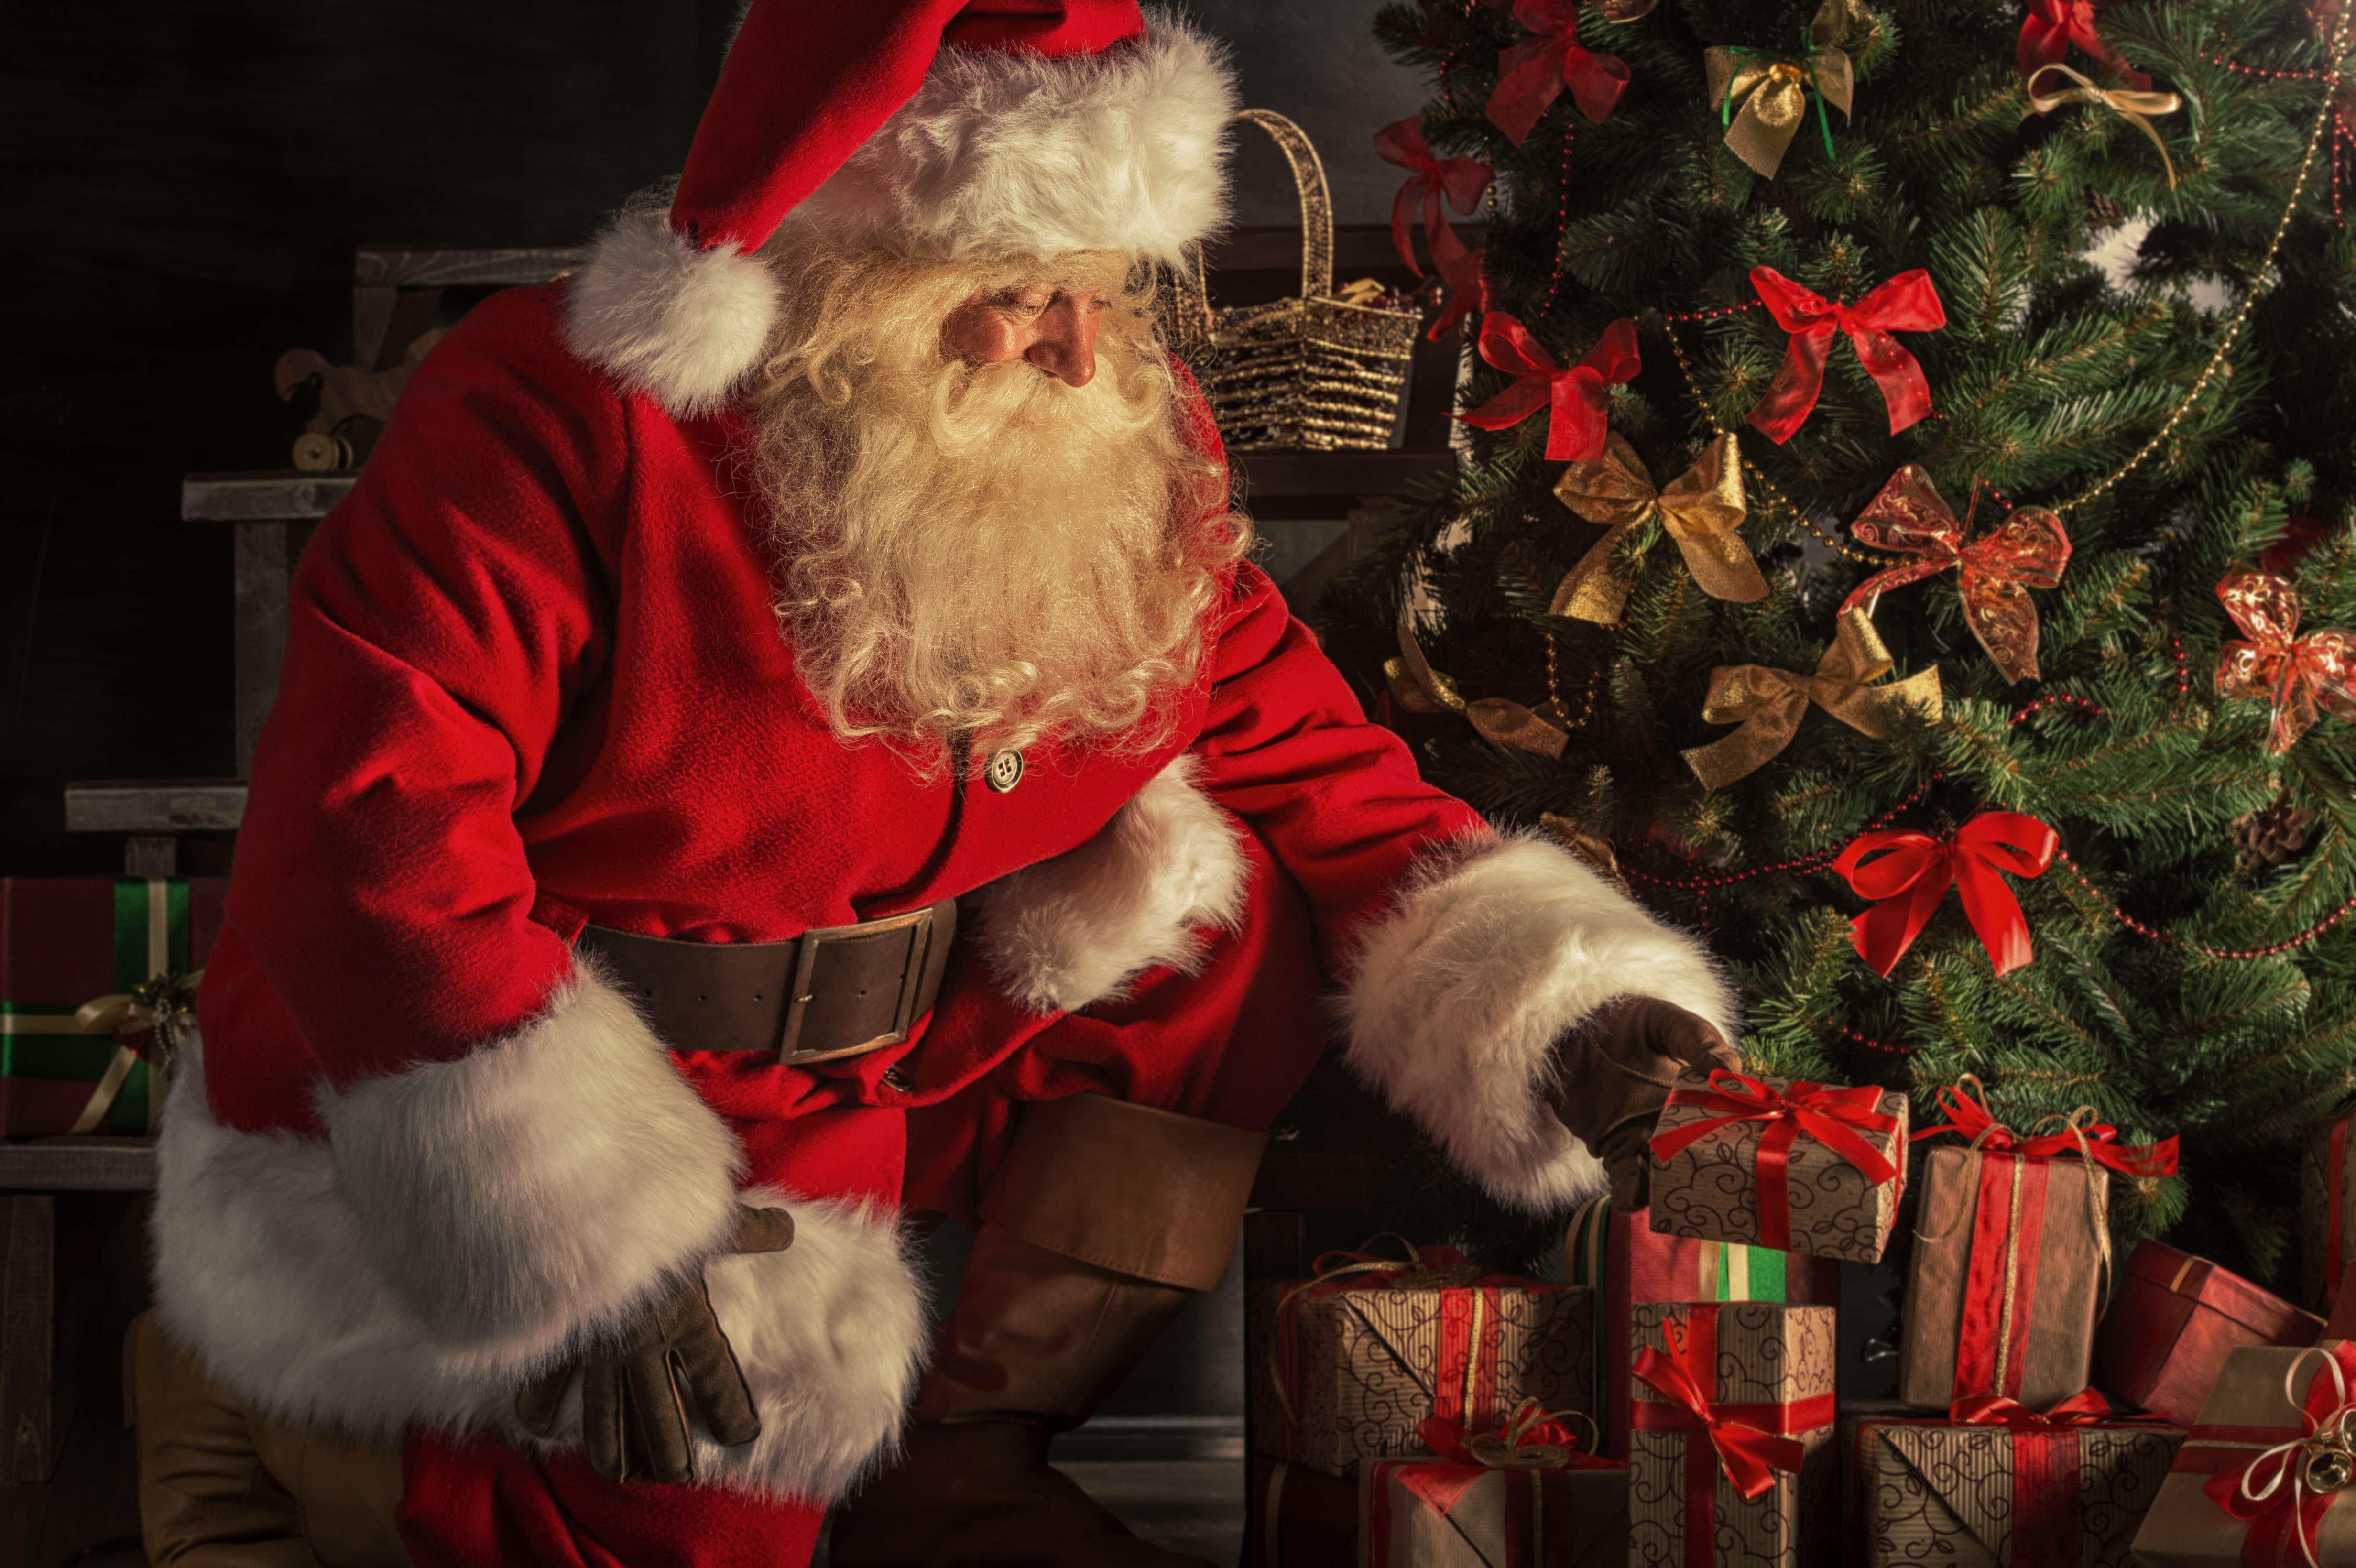 Santa Claus wears the traditional fur-trimmed red suit and hat. He is placing a gift on a pile of presents under a decorated Christmas tree